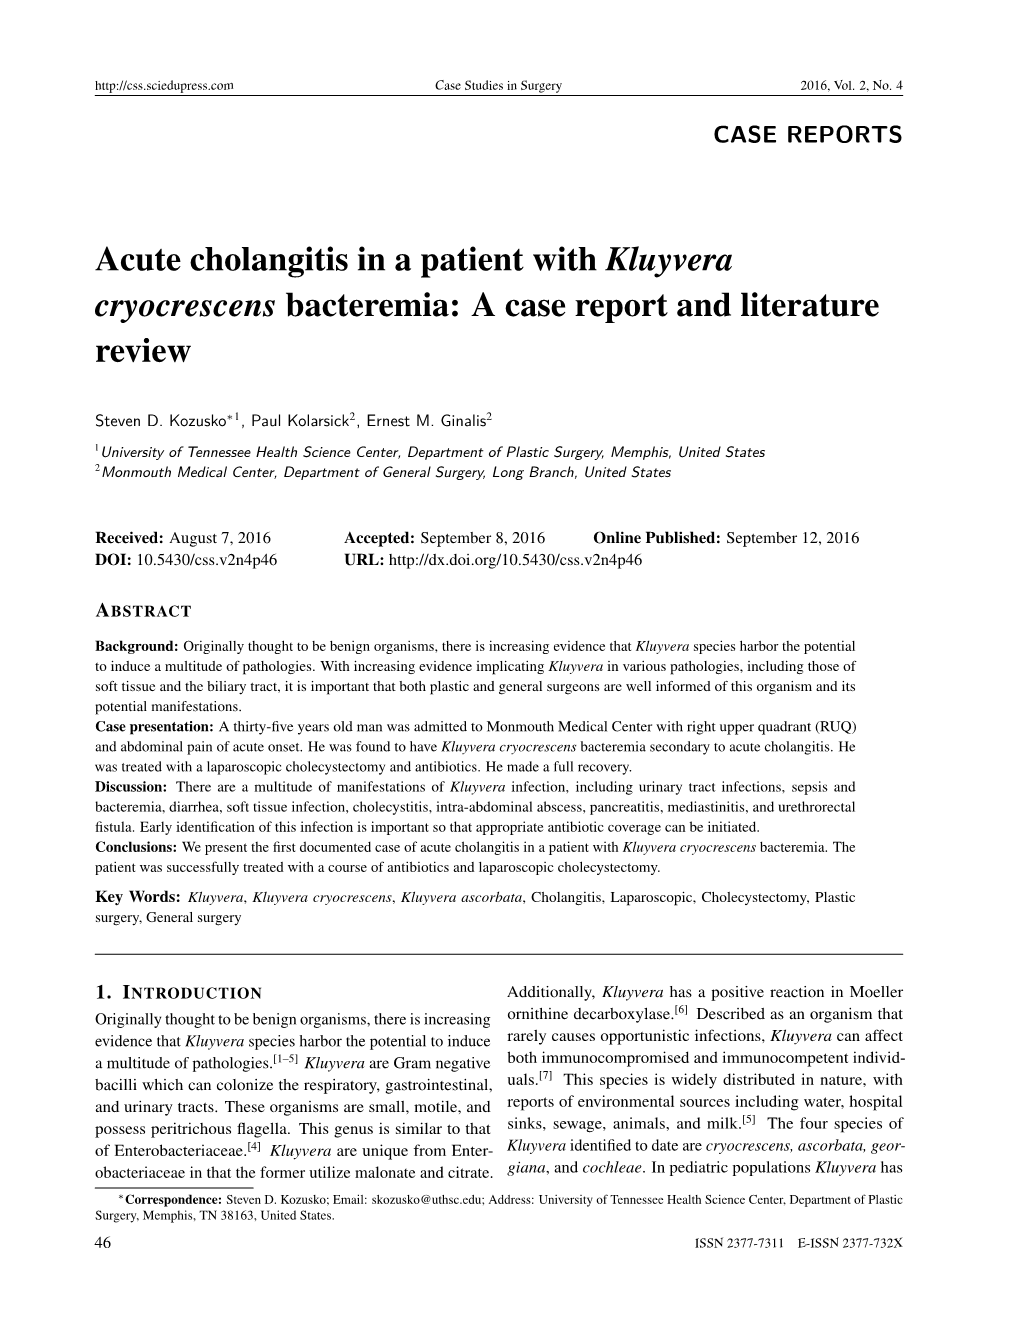 Acute Cholangitis in a Patient with Kluyvera Cryocrescens Bacteremia: a Case Report and Literature Review